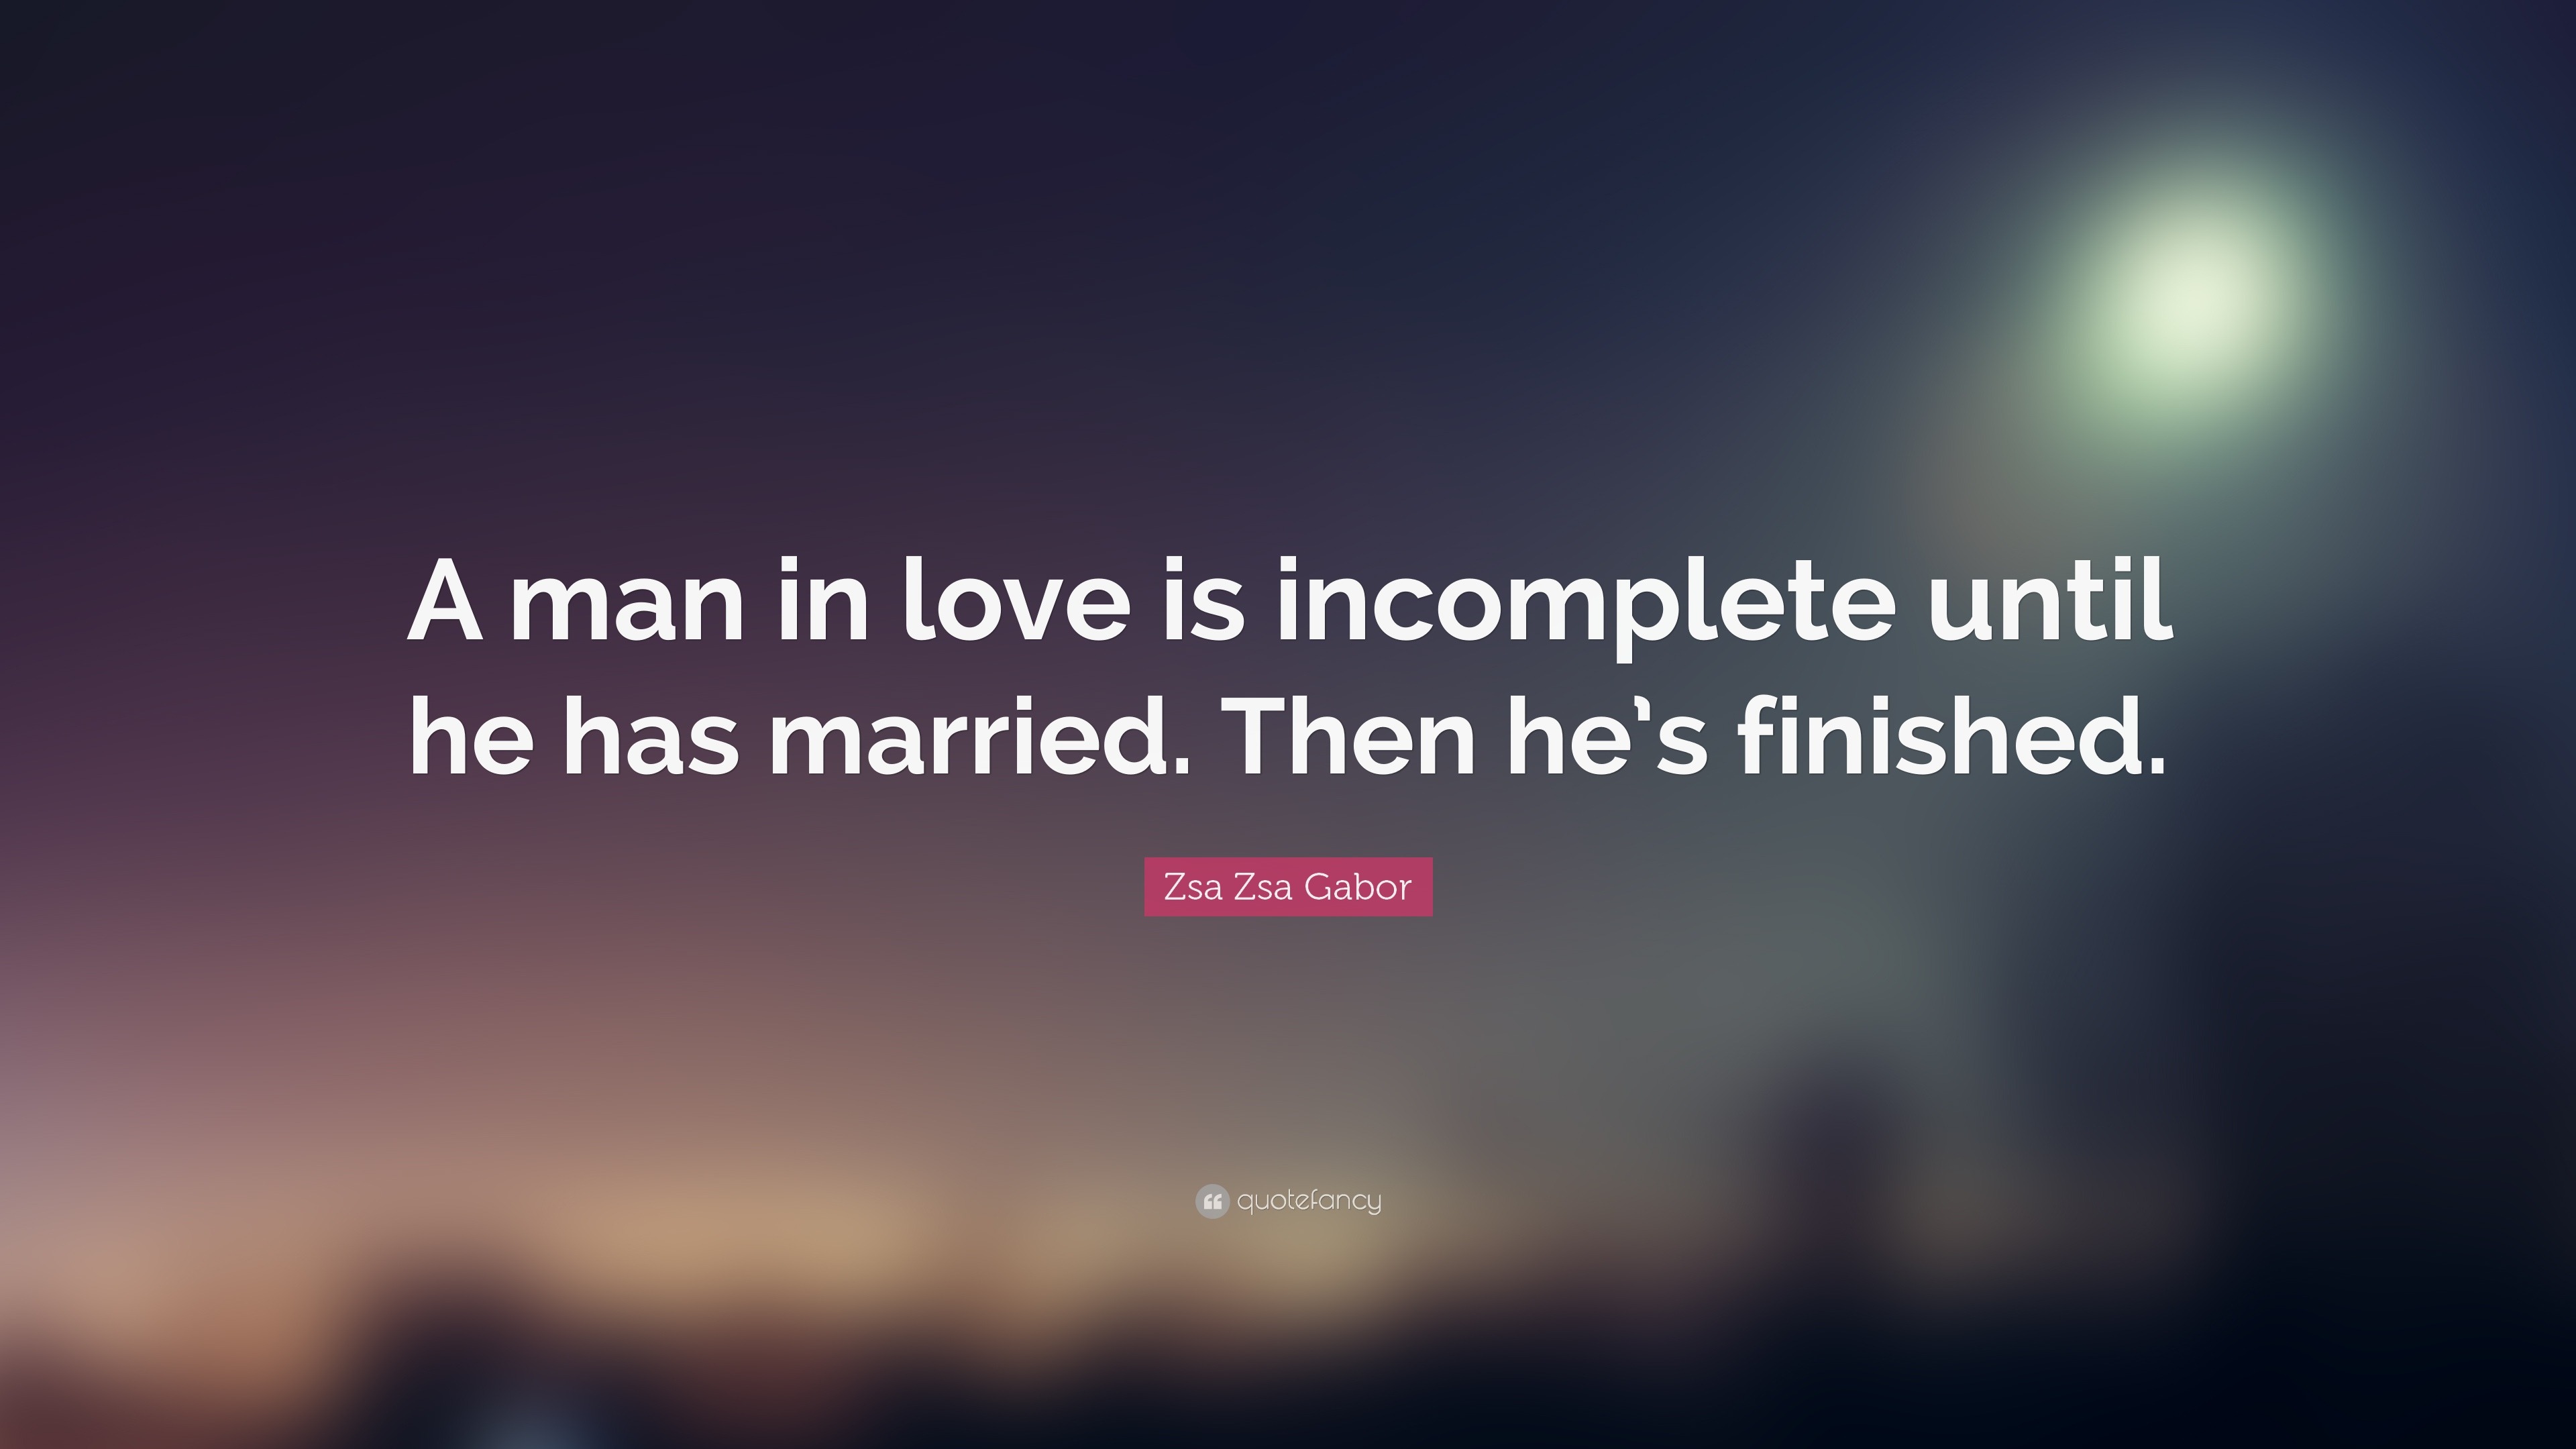 Zsa Zsa Gabor Quote “A man in love is in plete until he has married